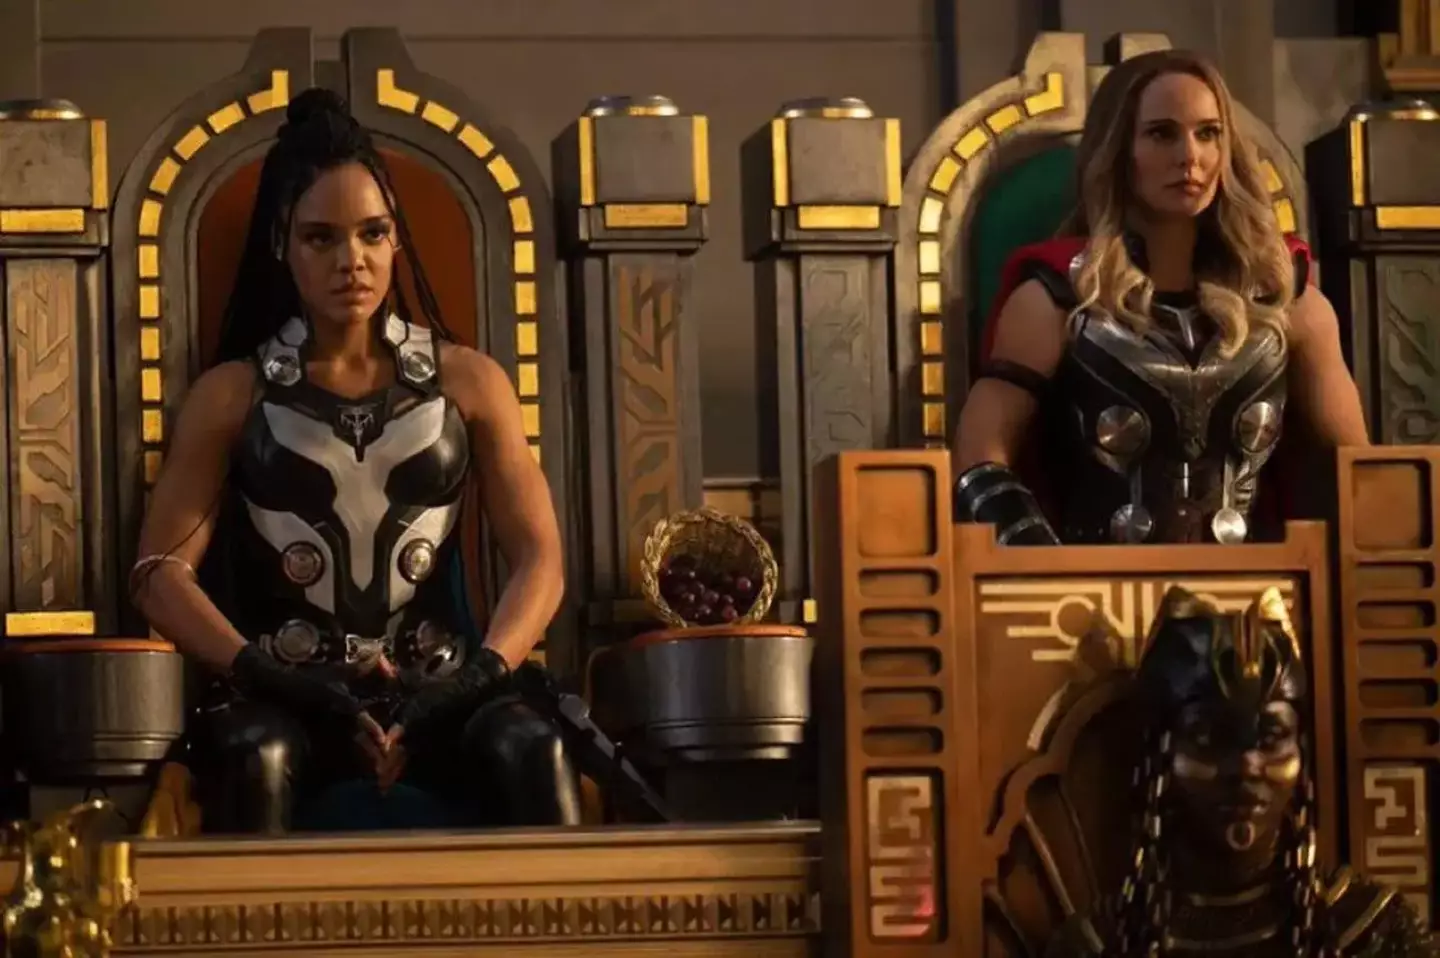 Tessa Thompson and Natalie Portman as King Valkyrie and Mighty Thor.